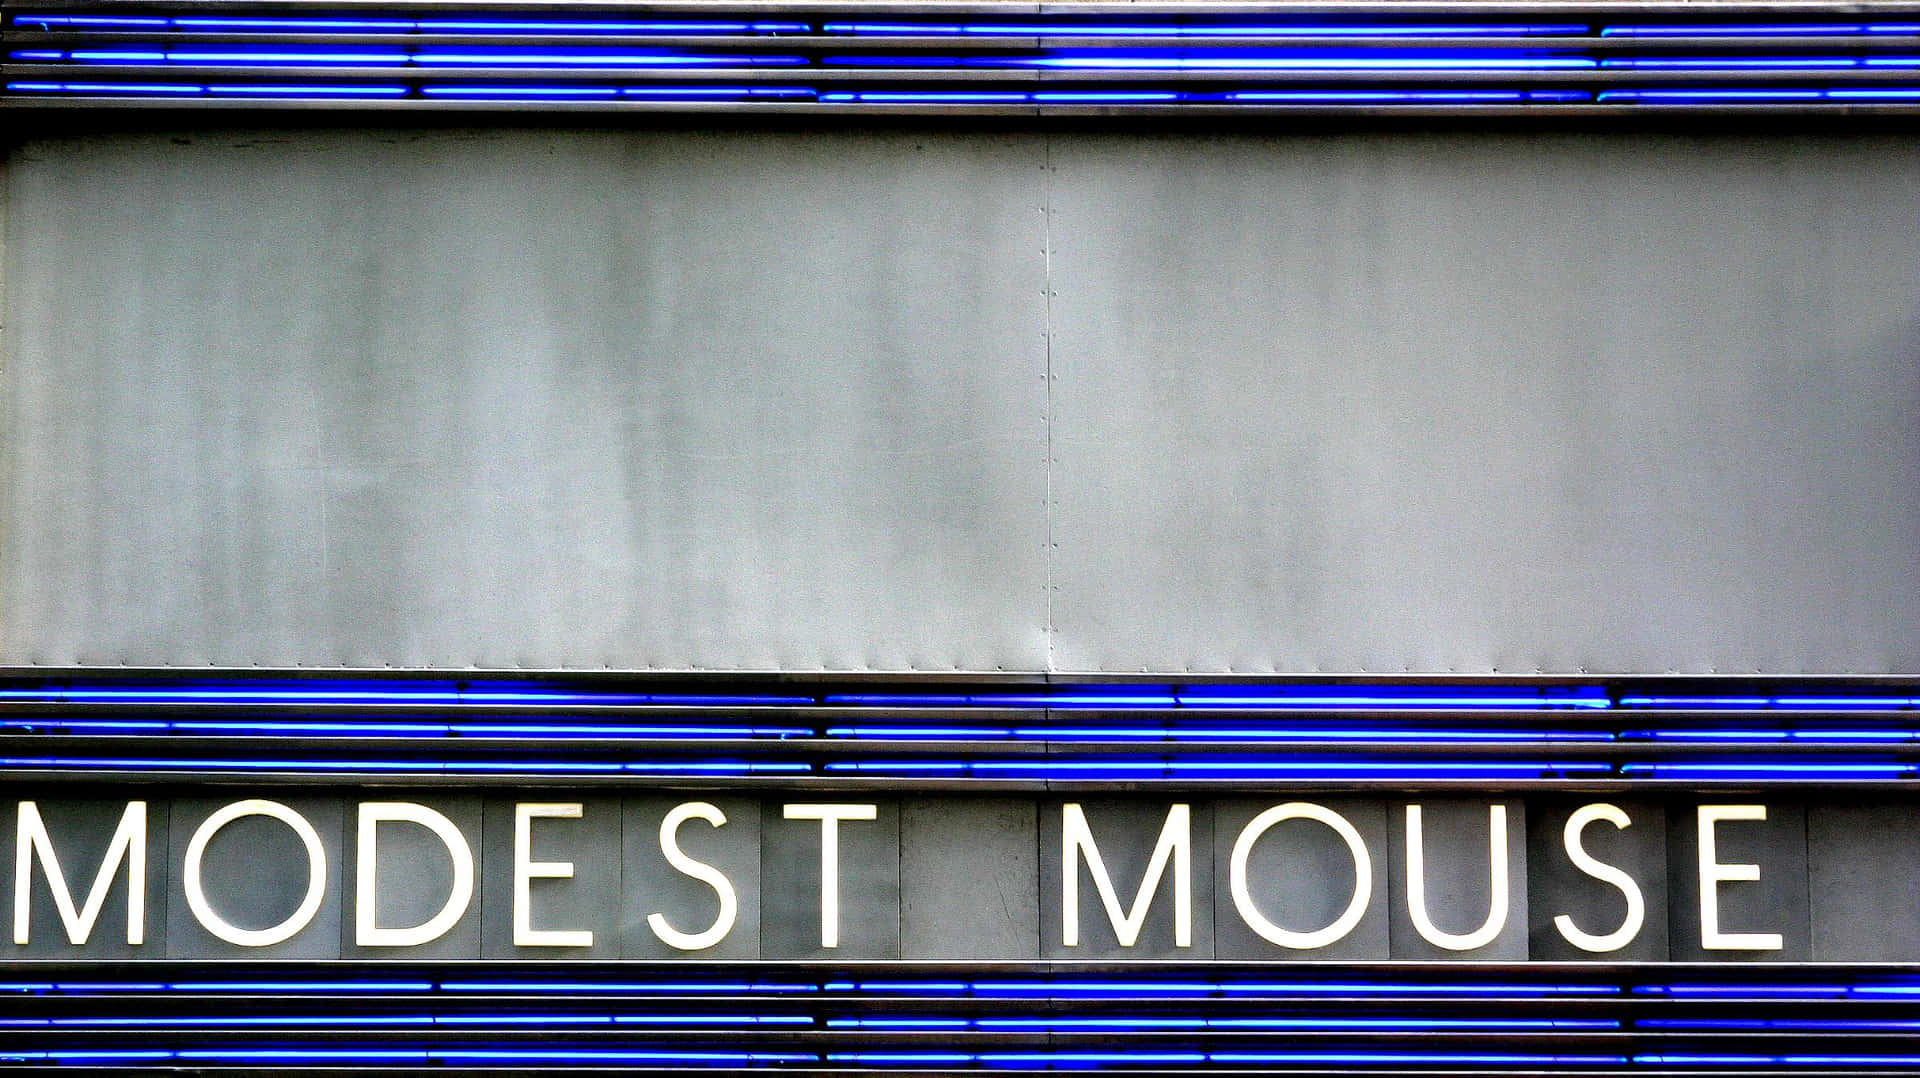 Modest Mouse Signage Mounted On The Wall Wallpaper